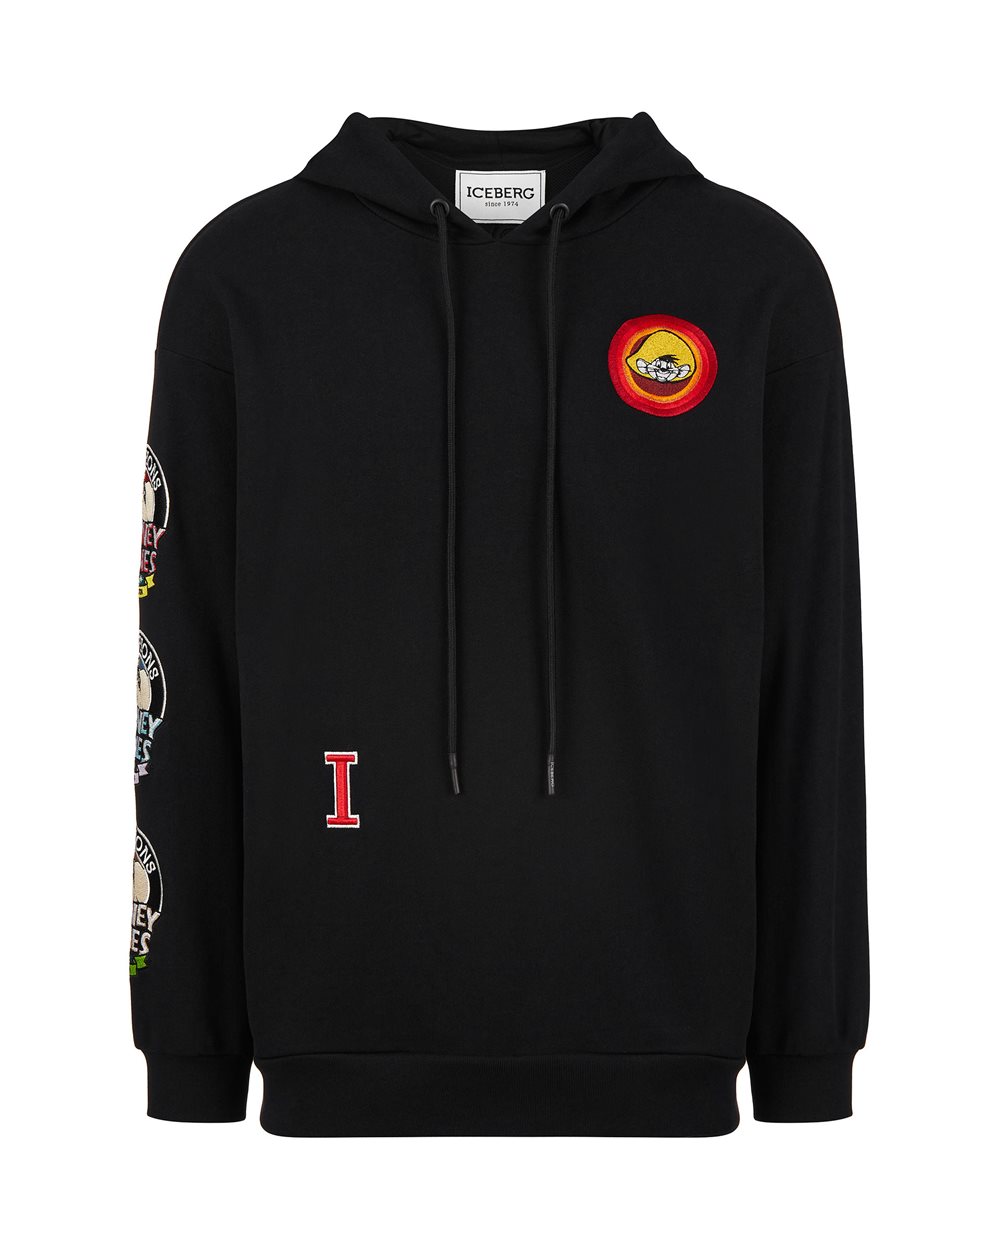 Iceberg sweatshirt Looney patches Tunes | Hooded with